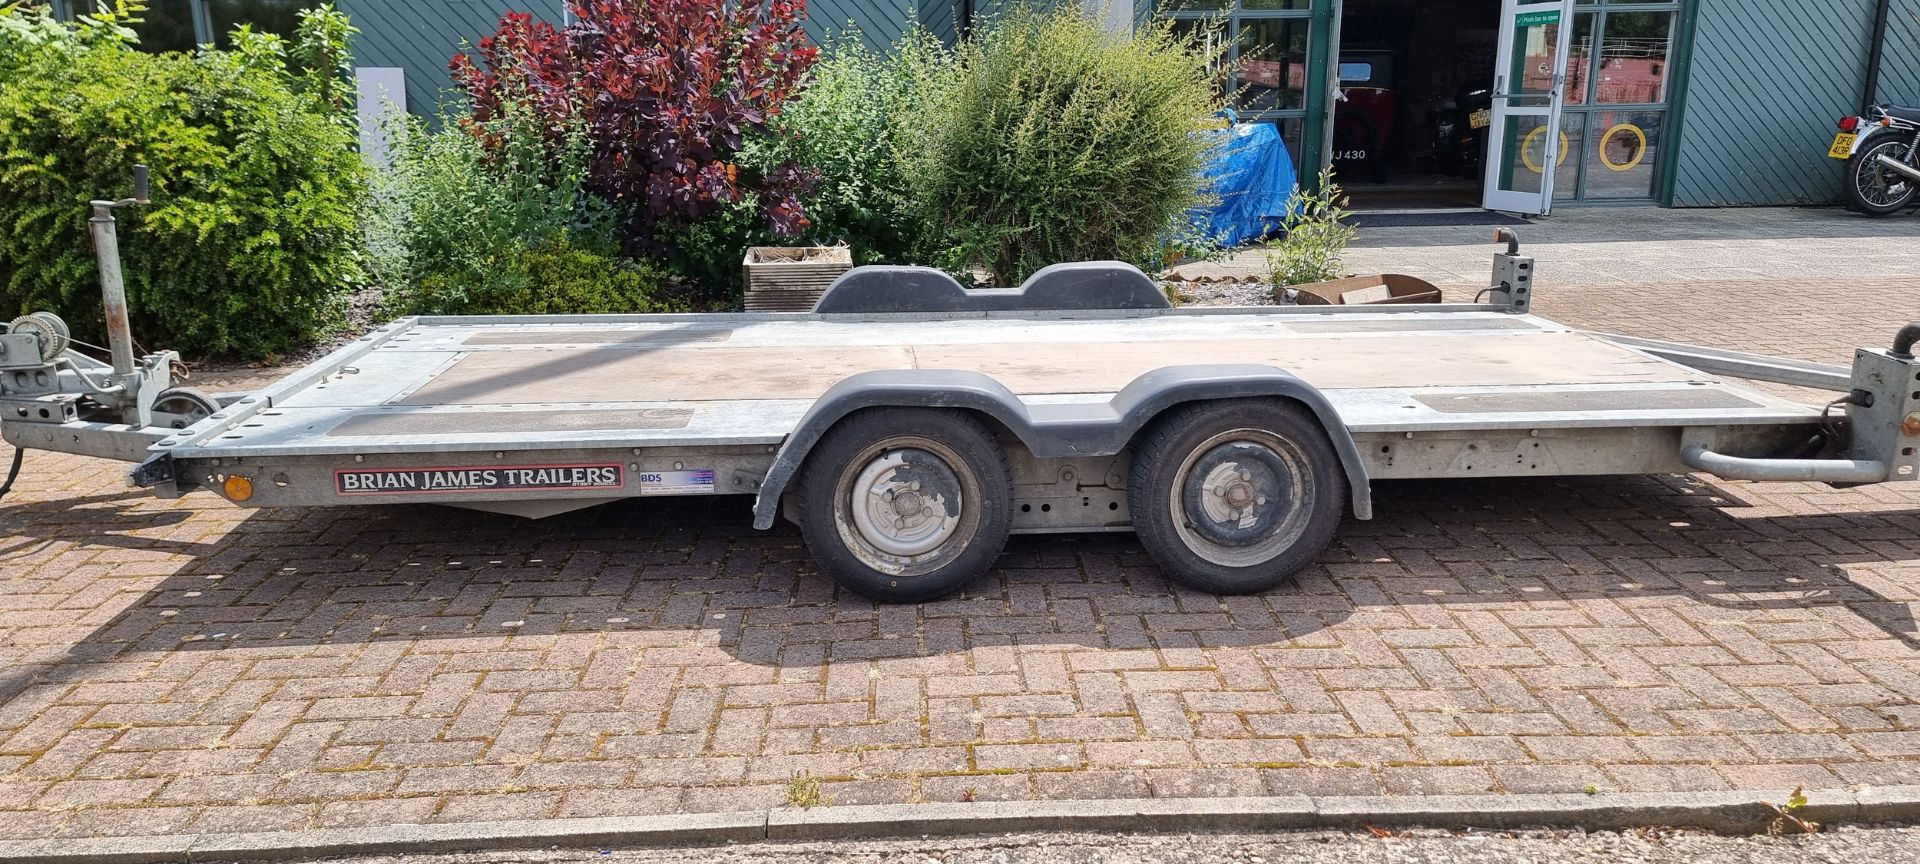 A Brian James twin axel car trailer, 1600kg load, with pull out ramps and locking tow hitch with